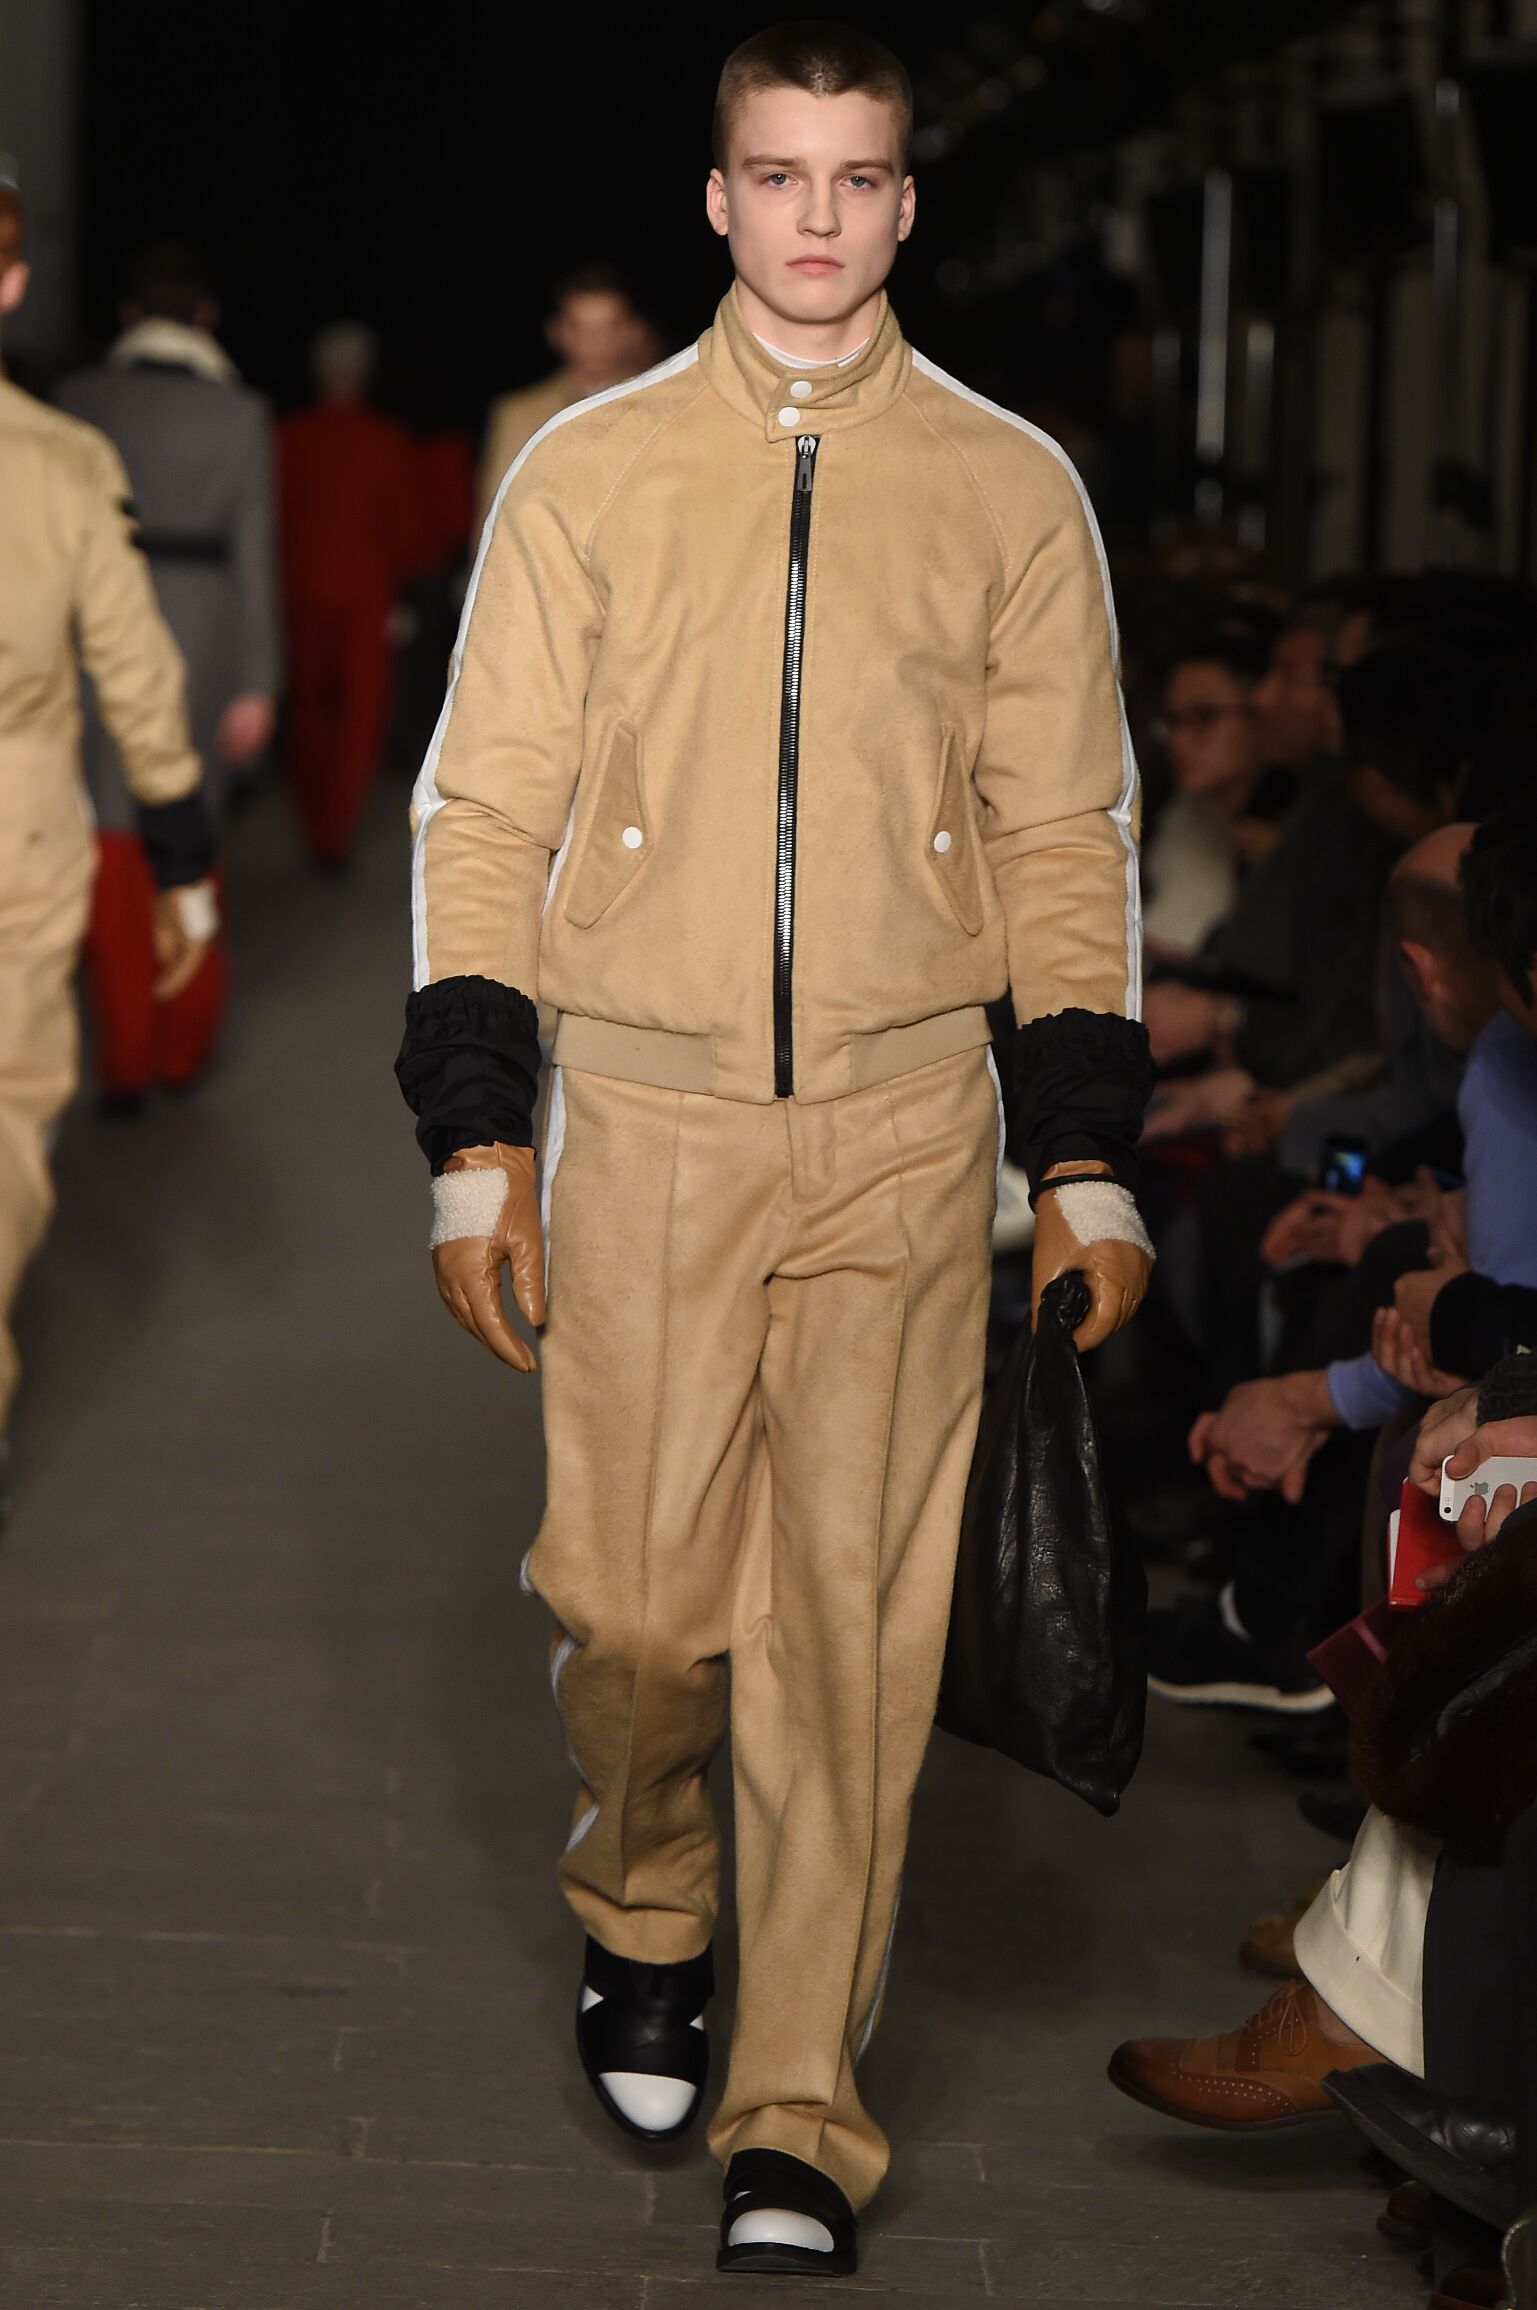 Catwalk Andrea Pompilio Fall Winter 2015 16 Men's Collection Milano Fashion Week